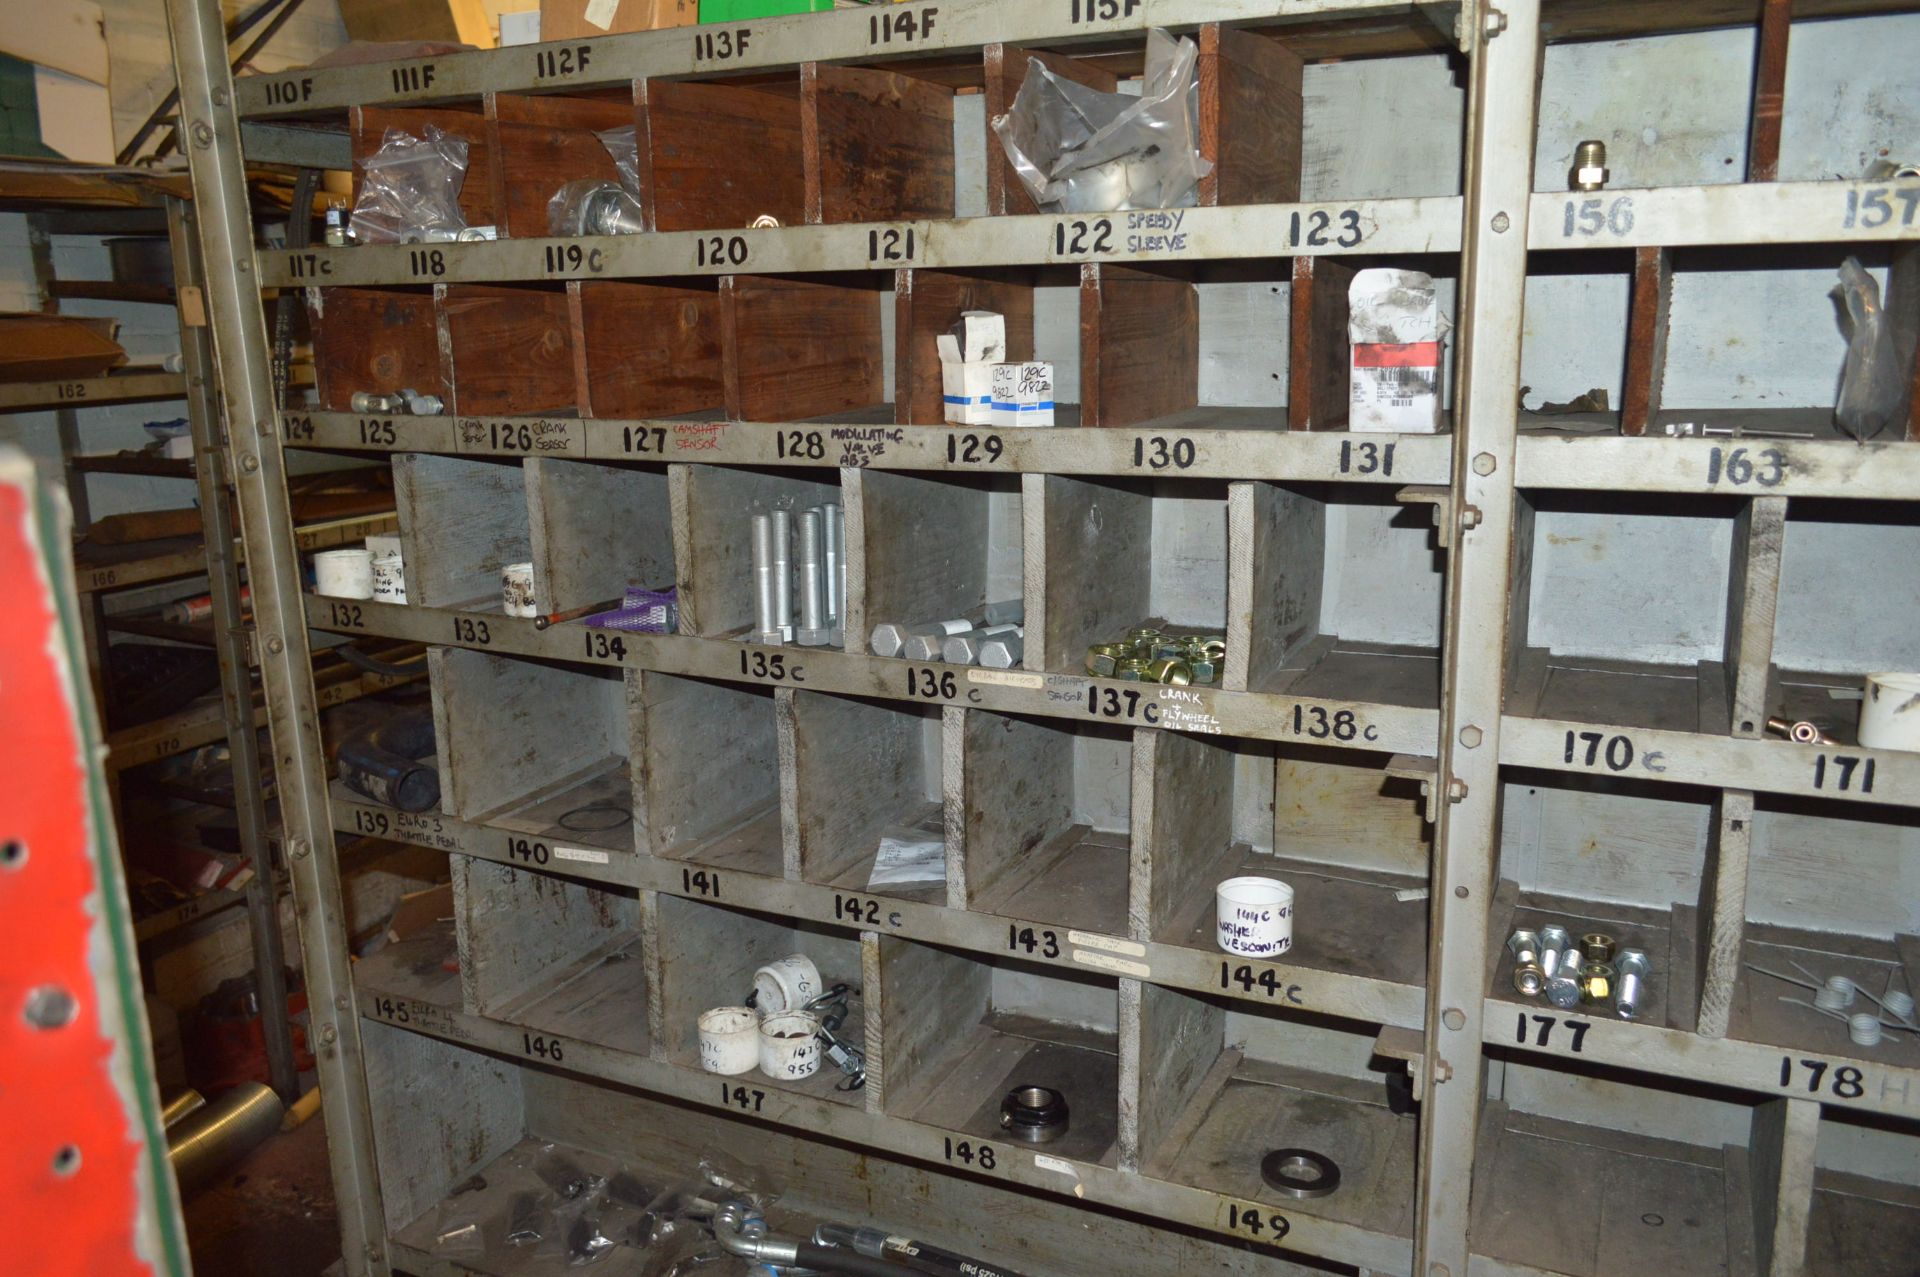 Multi-Compartment Steel Stock Rack, with contents including fastenings, fittings and electrical - Image 3 of 3